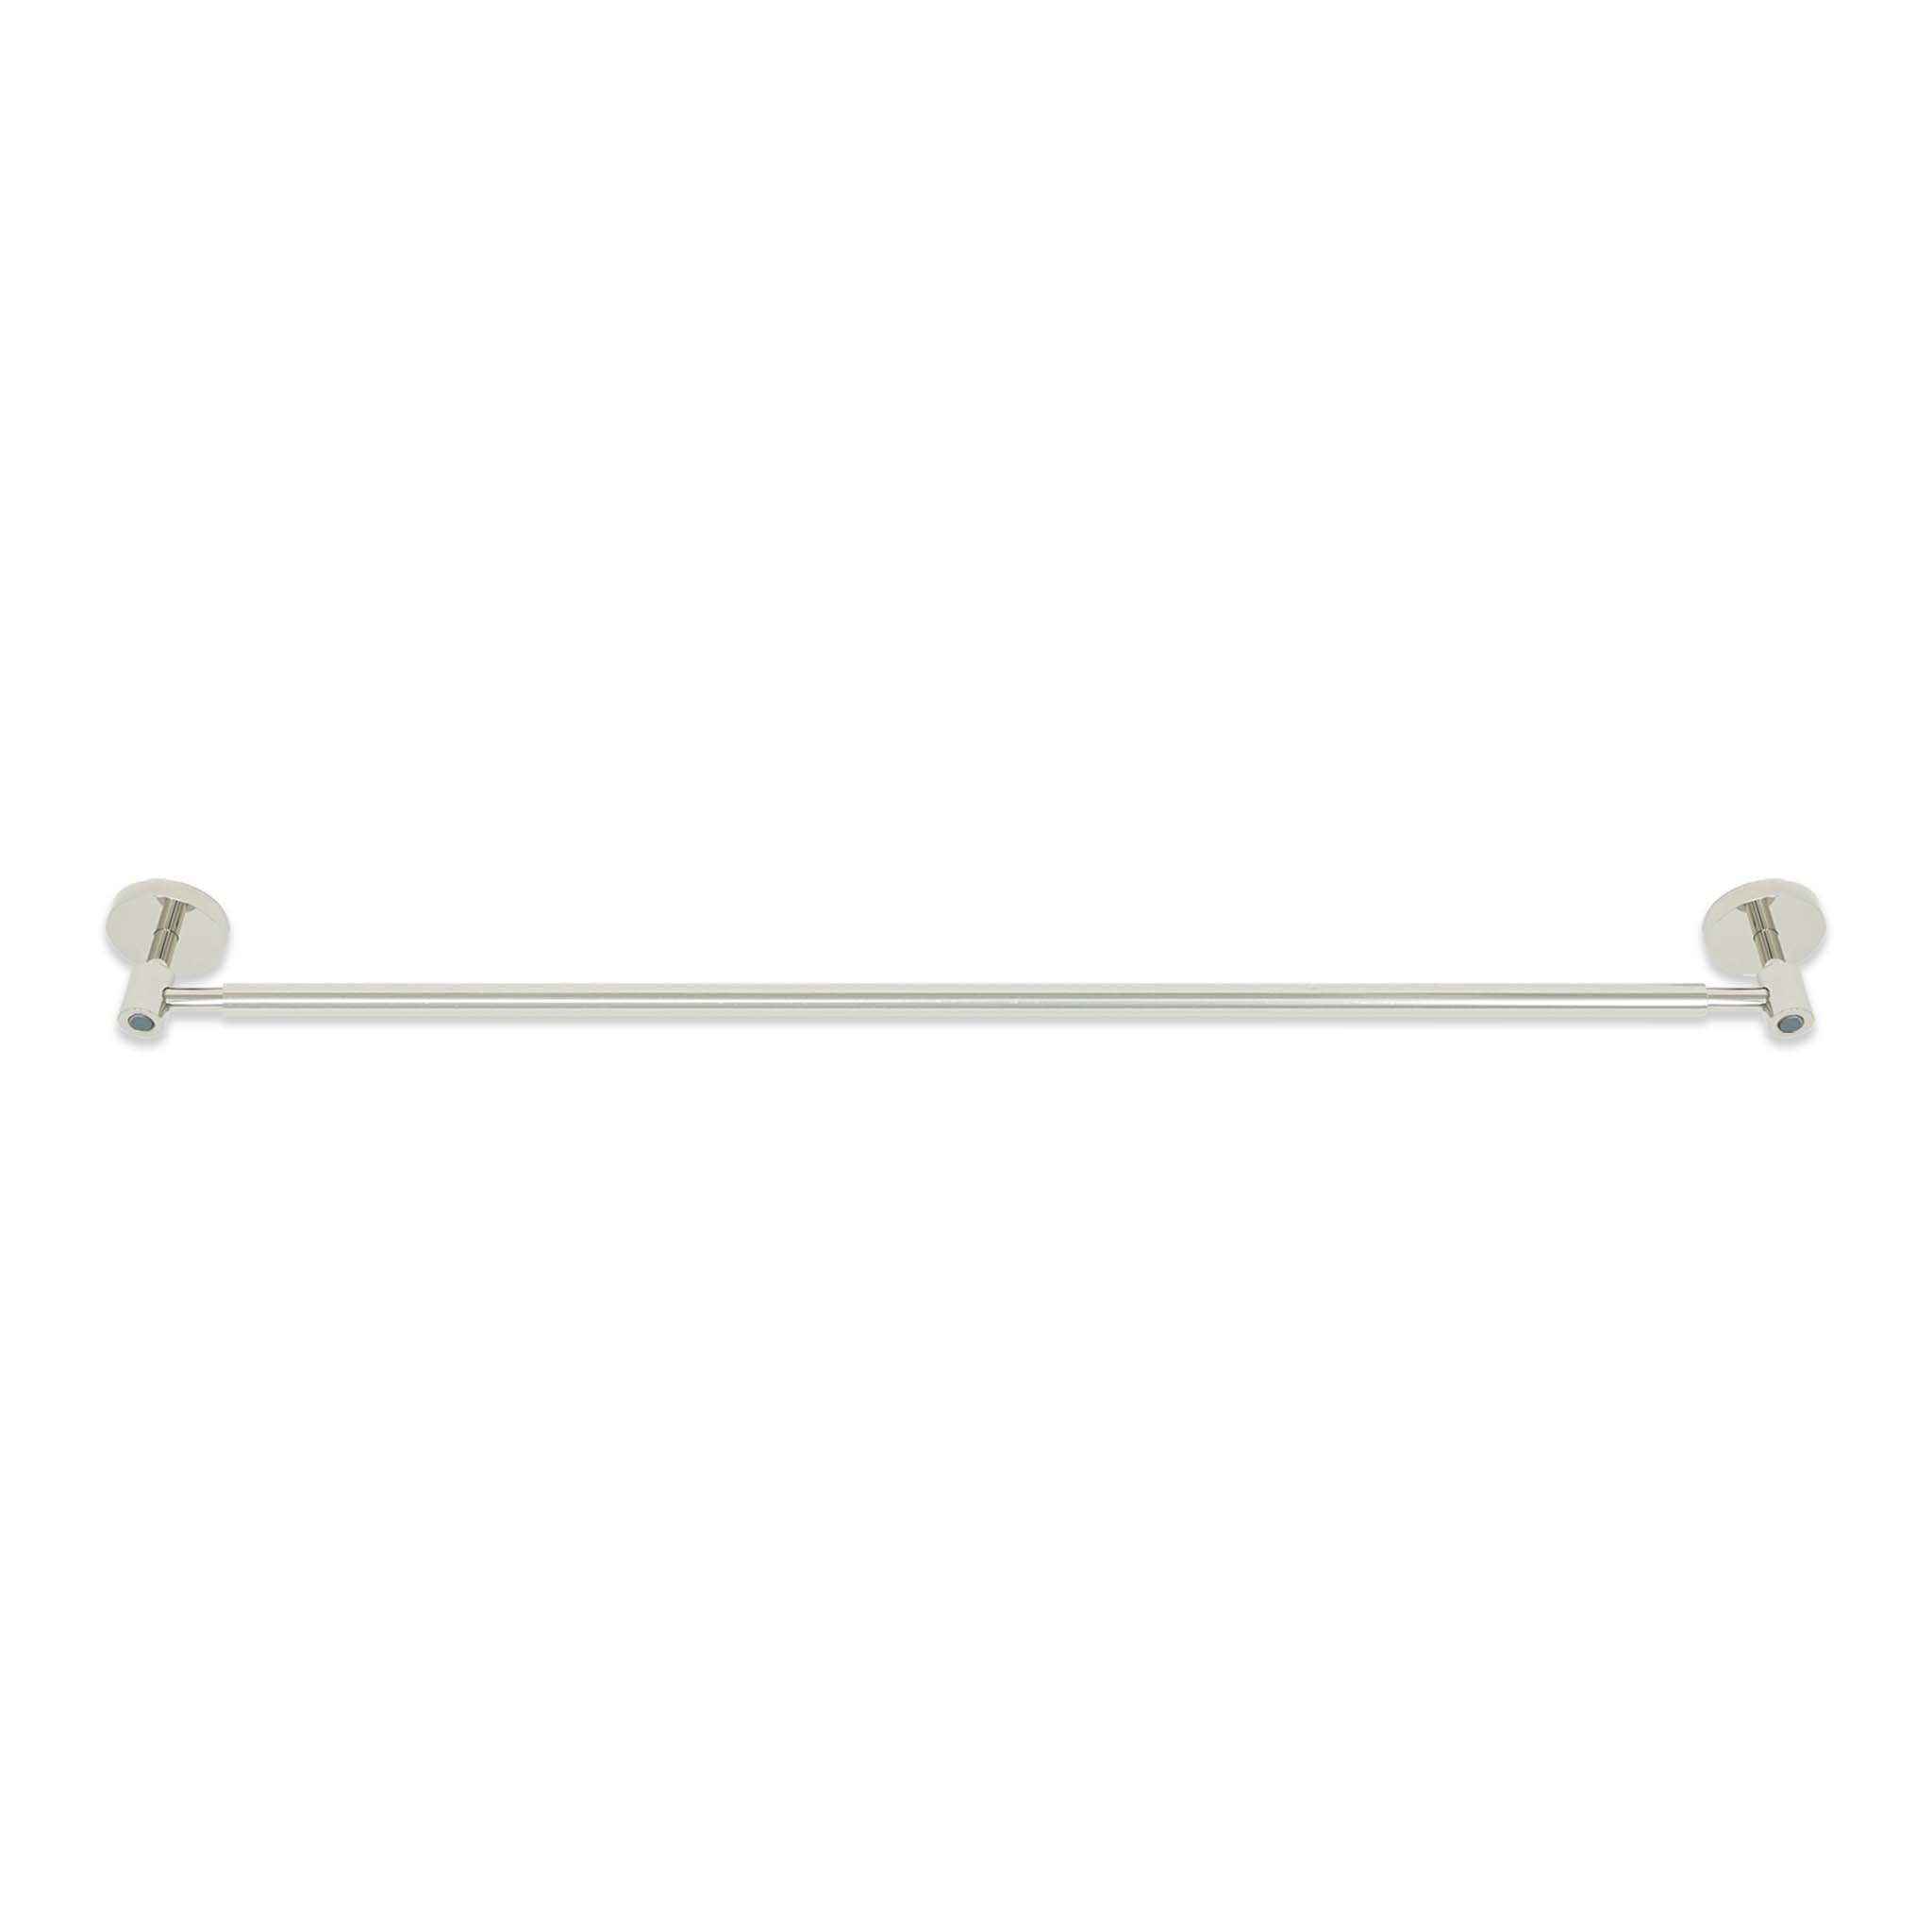 Nickel and python green color Head towel bar 24" Dutton Brown hardware